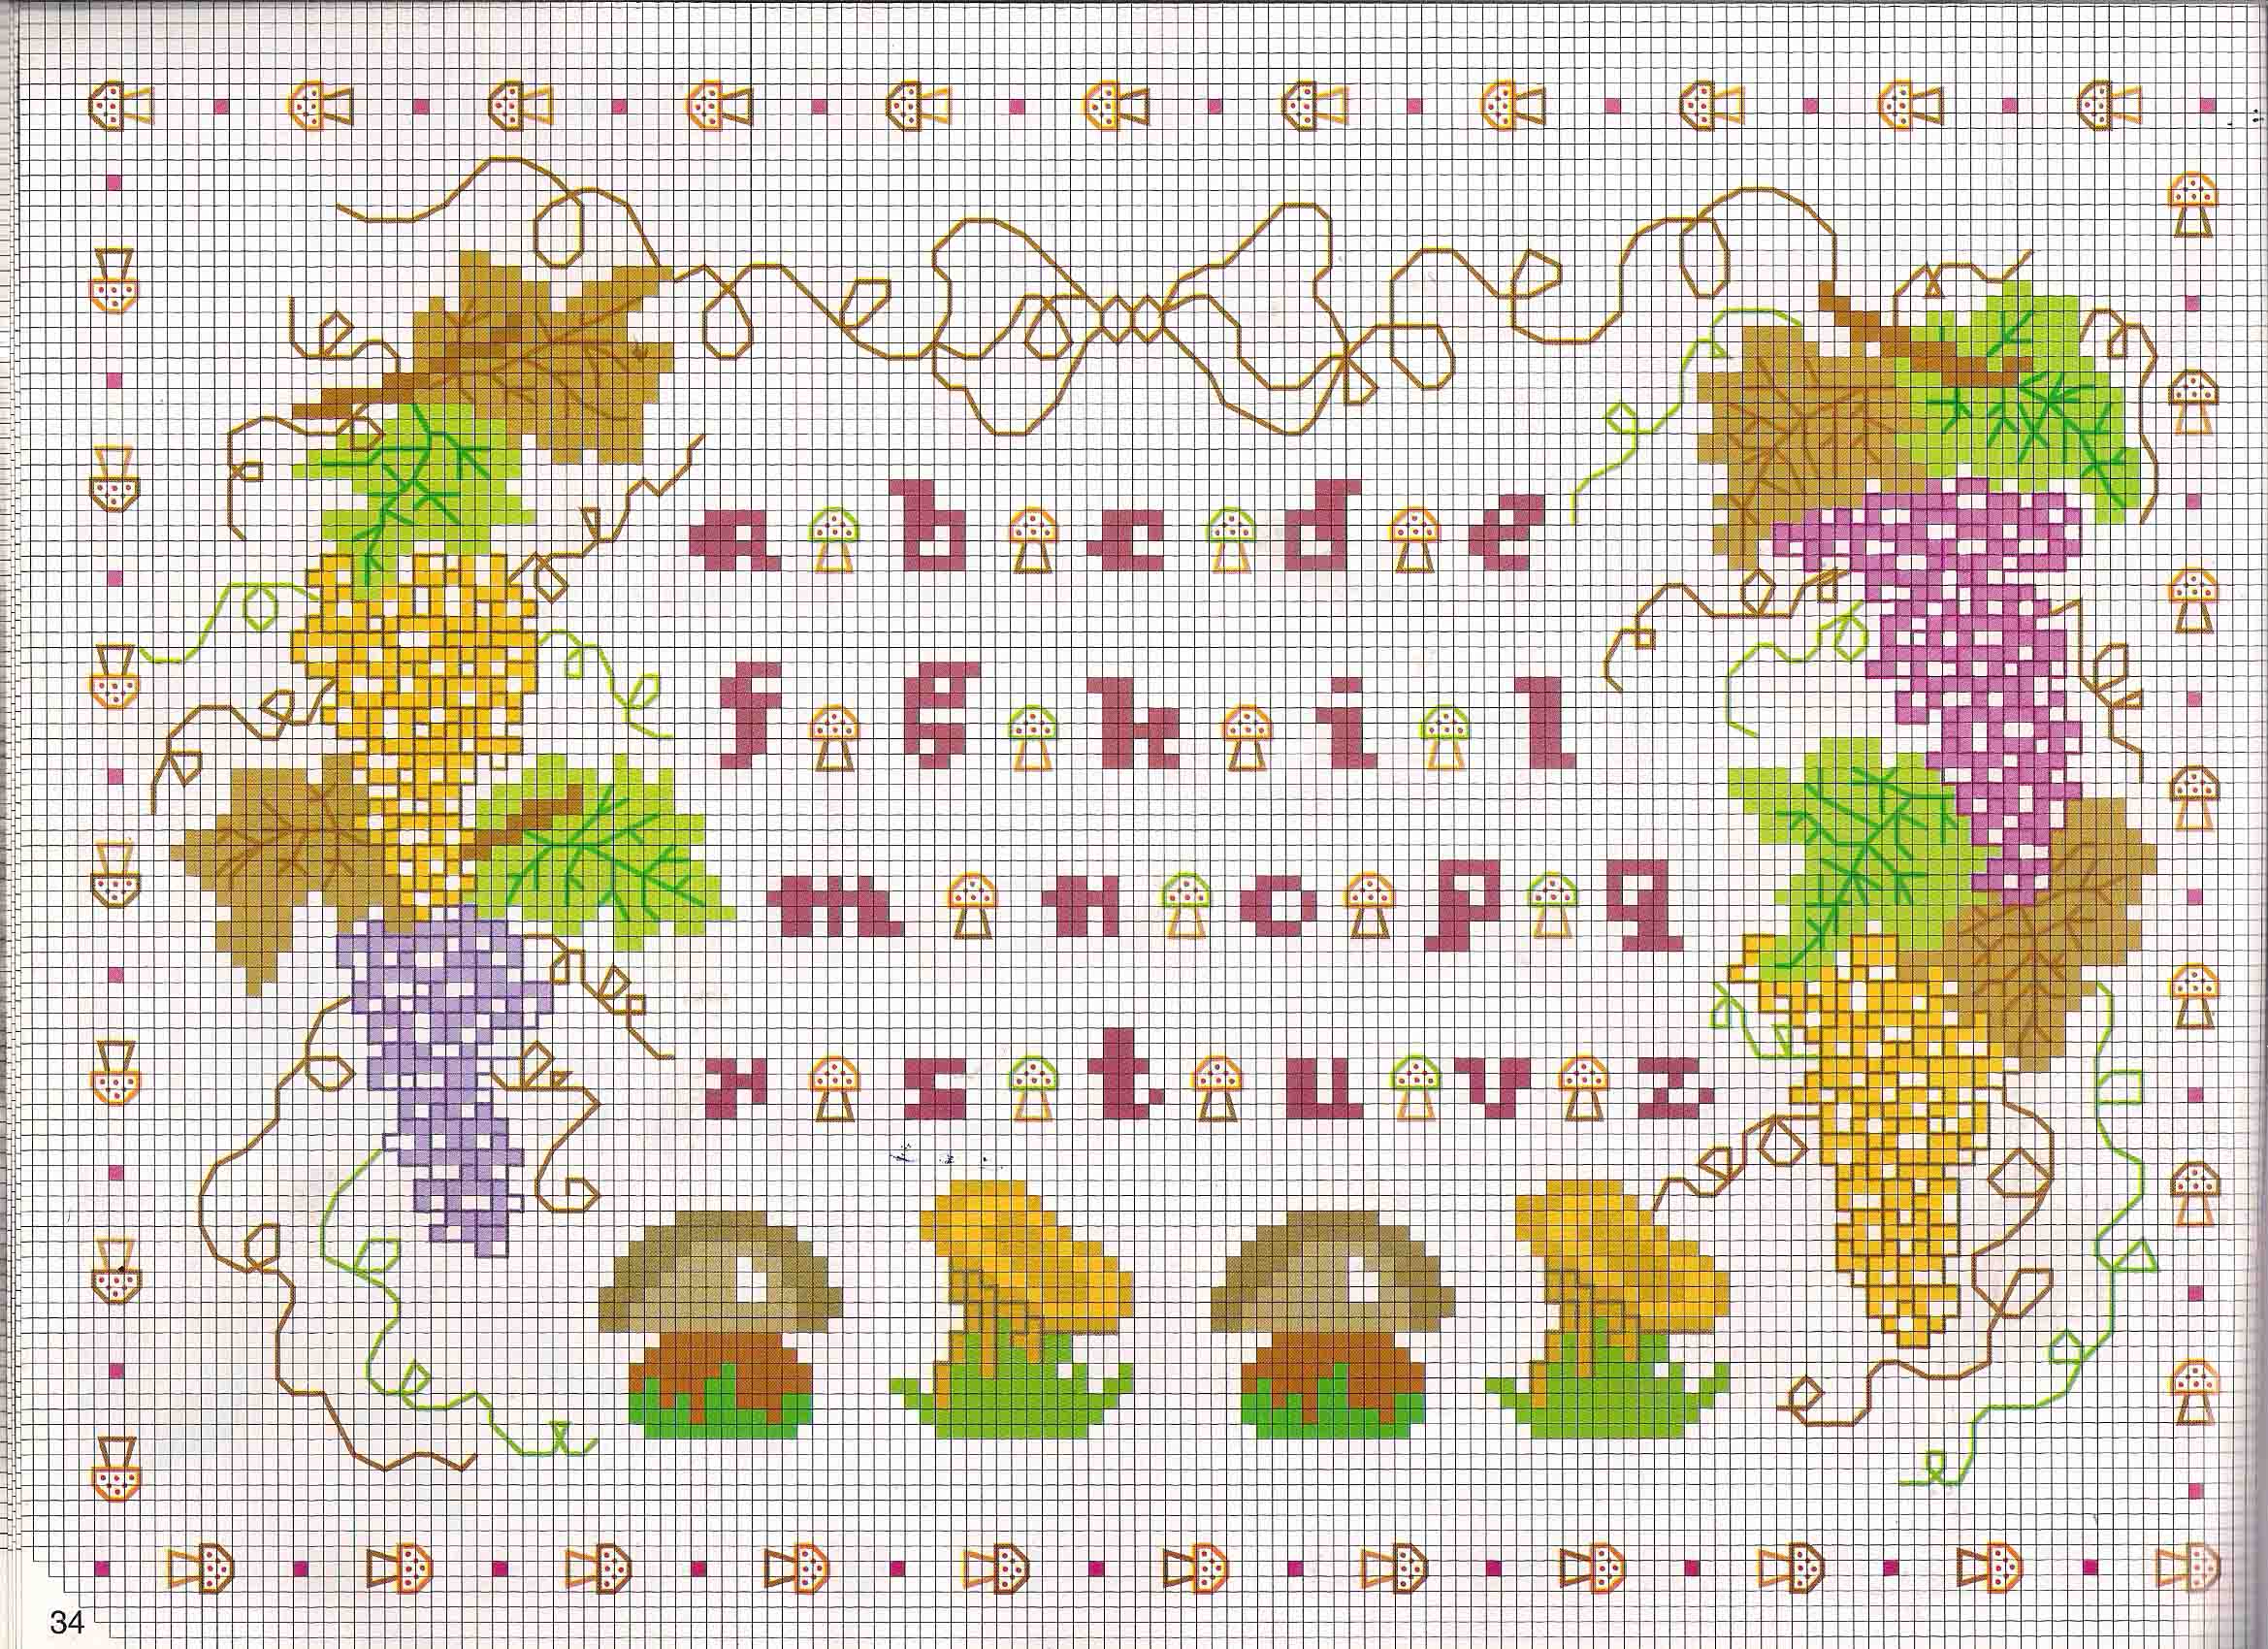 Cross stitch alphabet with mushrooms and grapes